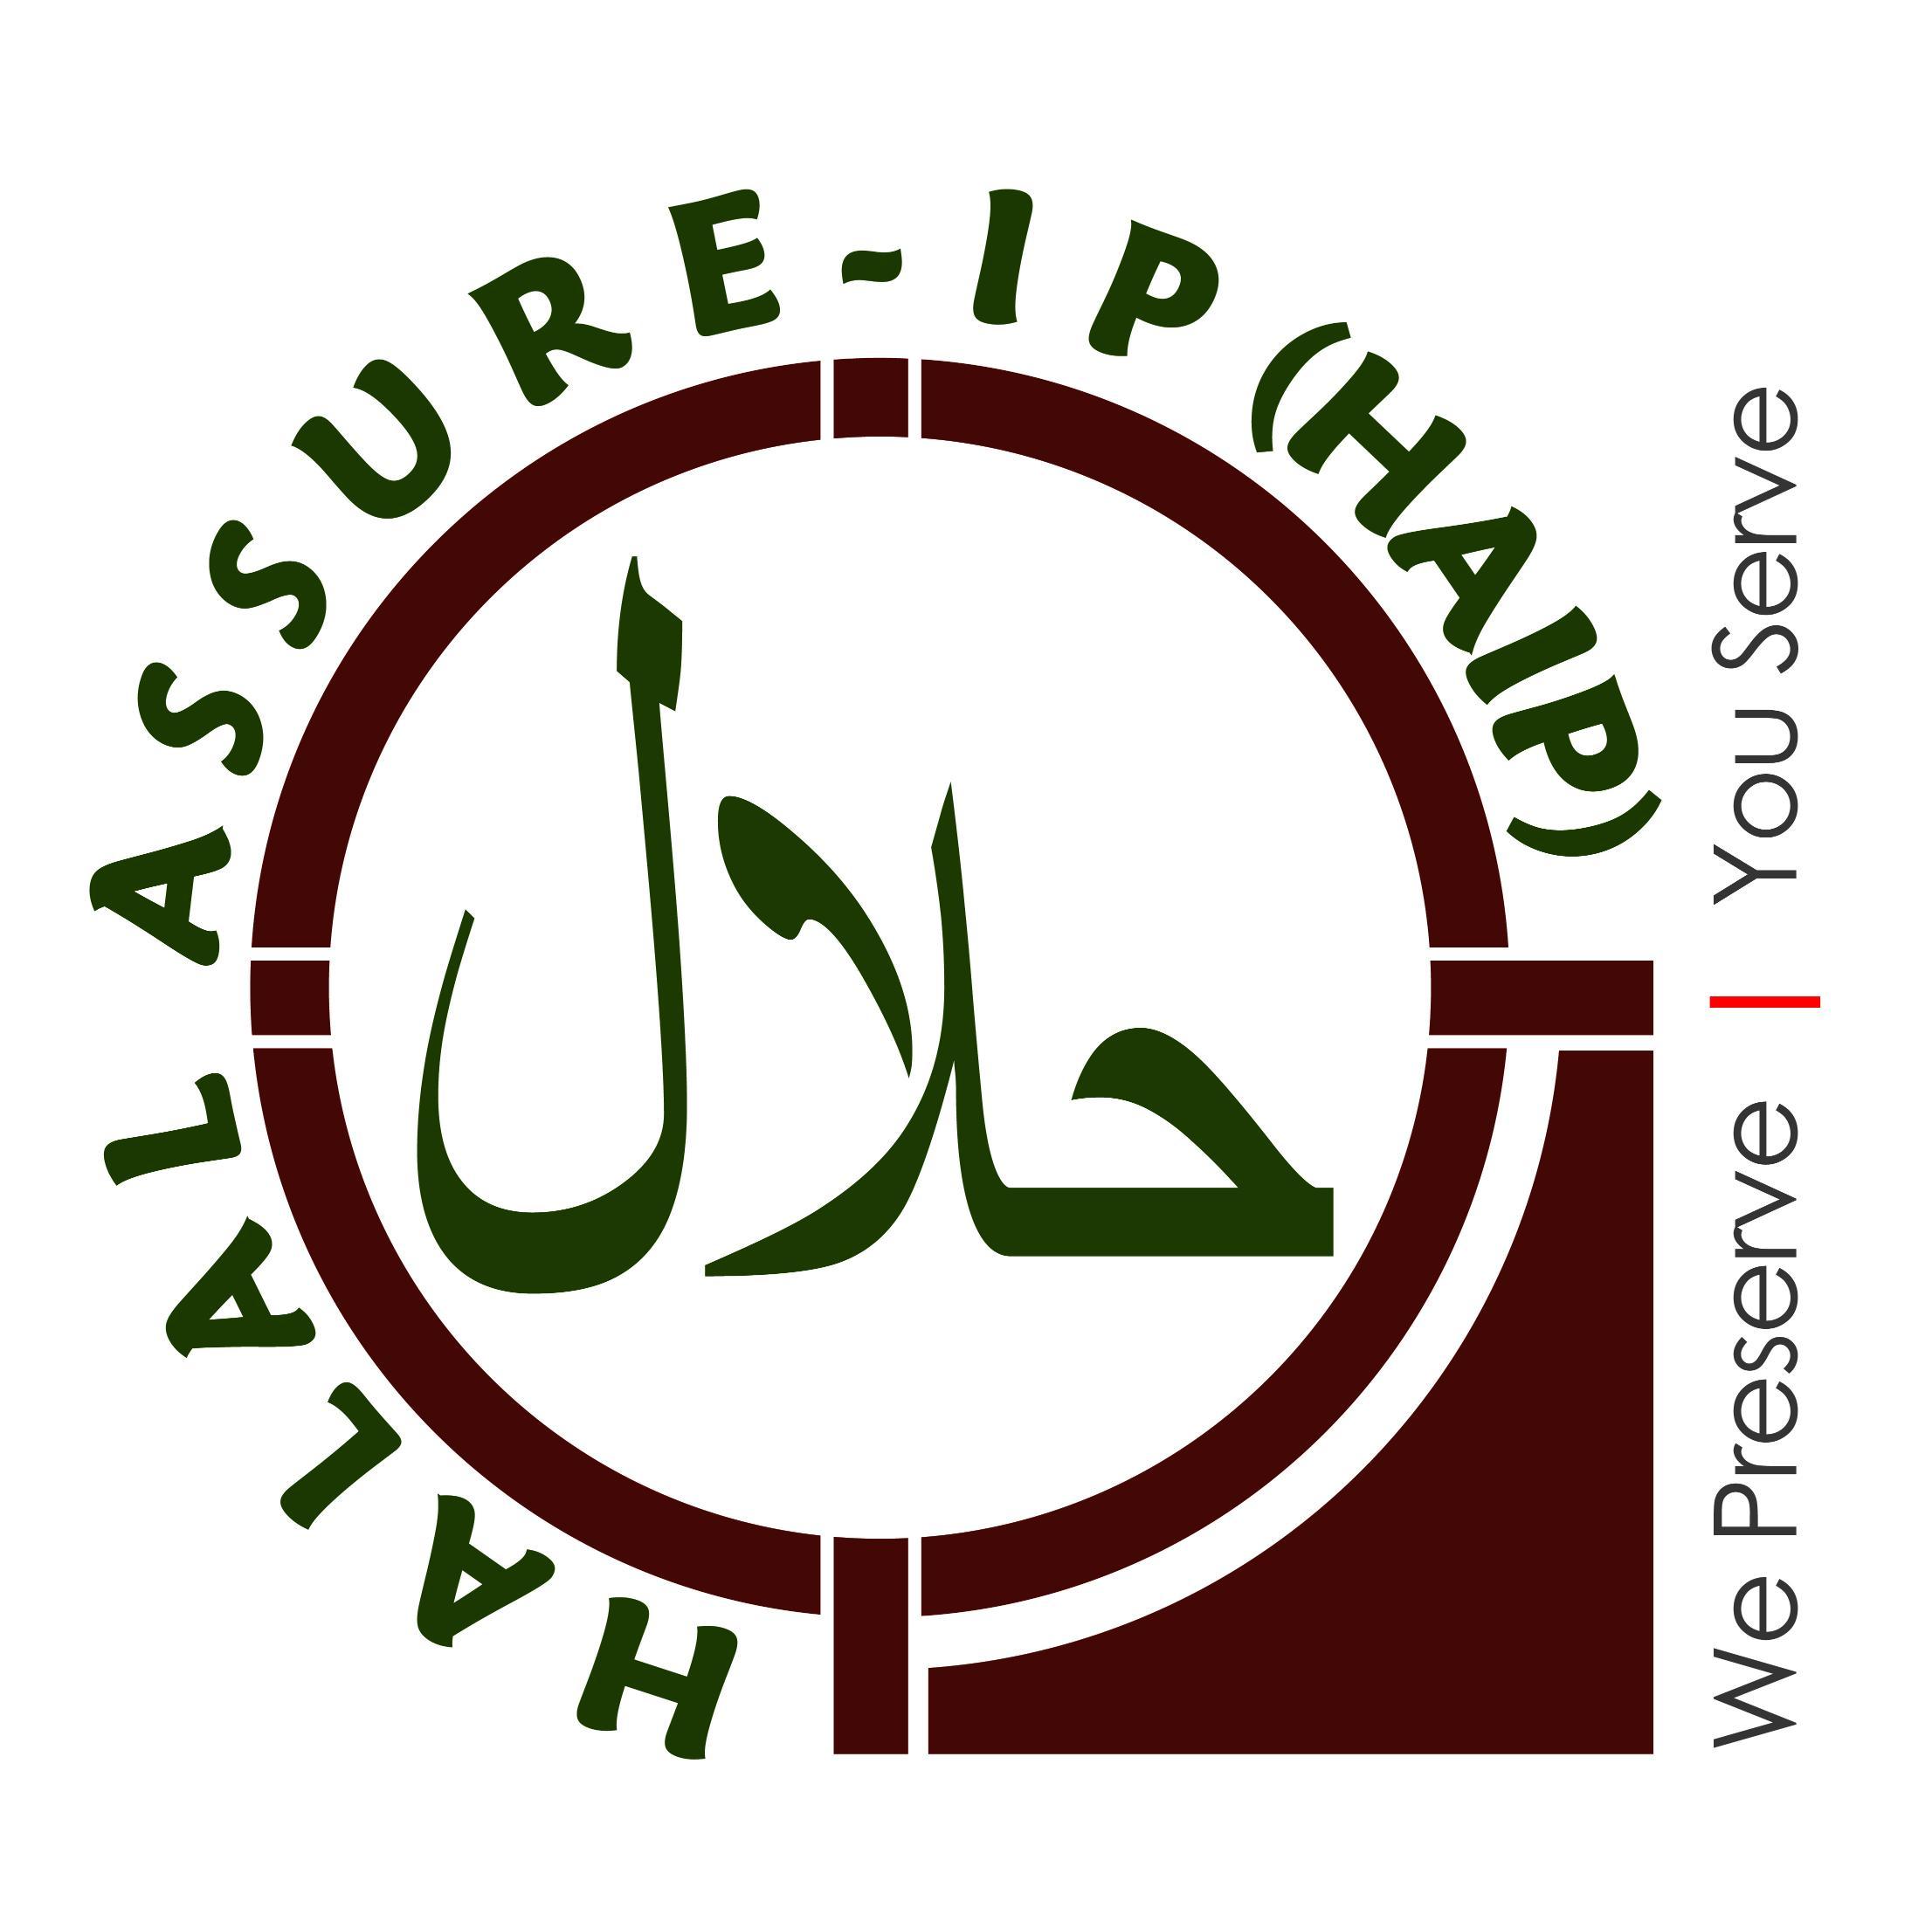 HalalAssure-IP is an independent #HalalCertification, #Research & Development and Consultation body for the #food, #pharmaceutical, #cosmetics & #healthcare